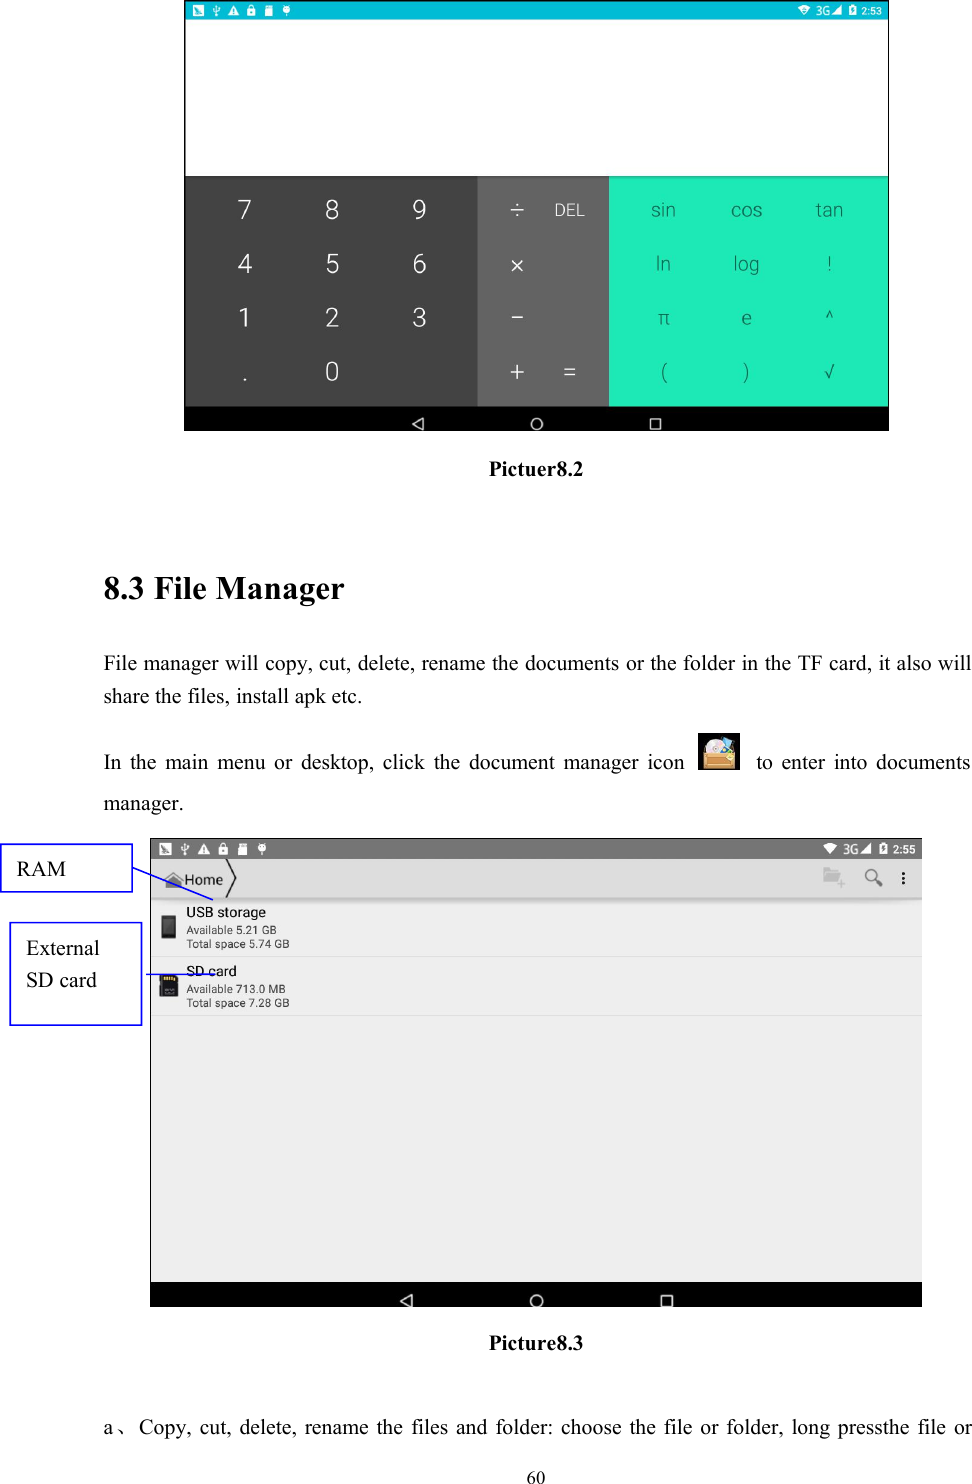 60Pictuer8.28.3 File ManagerFile manager will copy, cut, delete, rename the documents or the folder in the TF card, it also willshare the files, install apk etc.In the main menu or desktop, click the document manager icon to enter into documentsmanager.Picture8.3a、Copy, cut, delete, rename the files and folder: choose the file or folder, long pressthe file orRAMExternalSD card